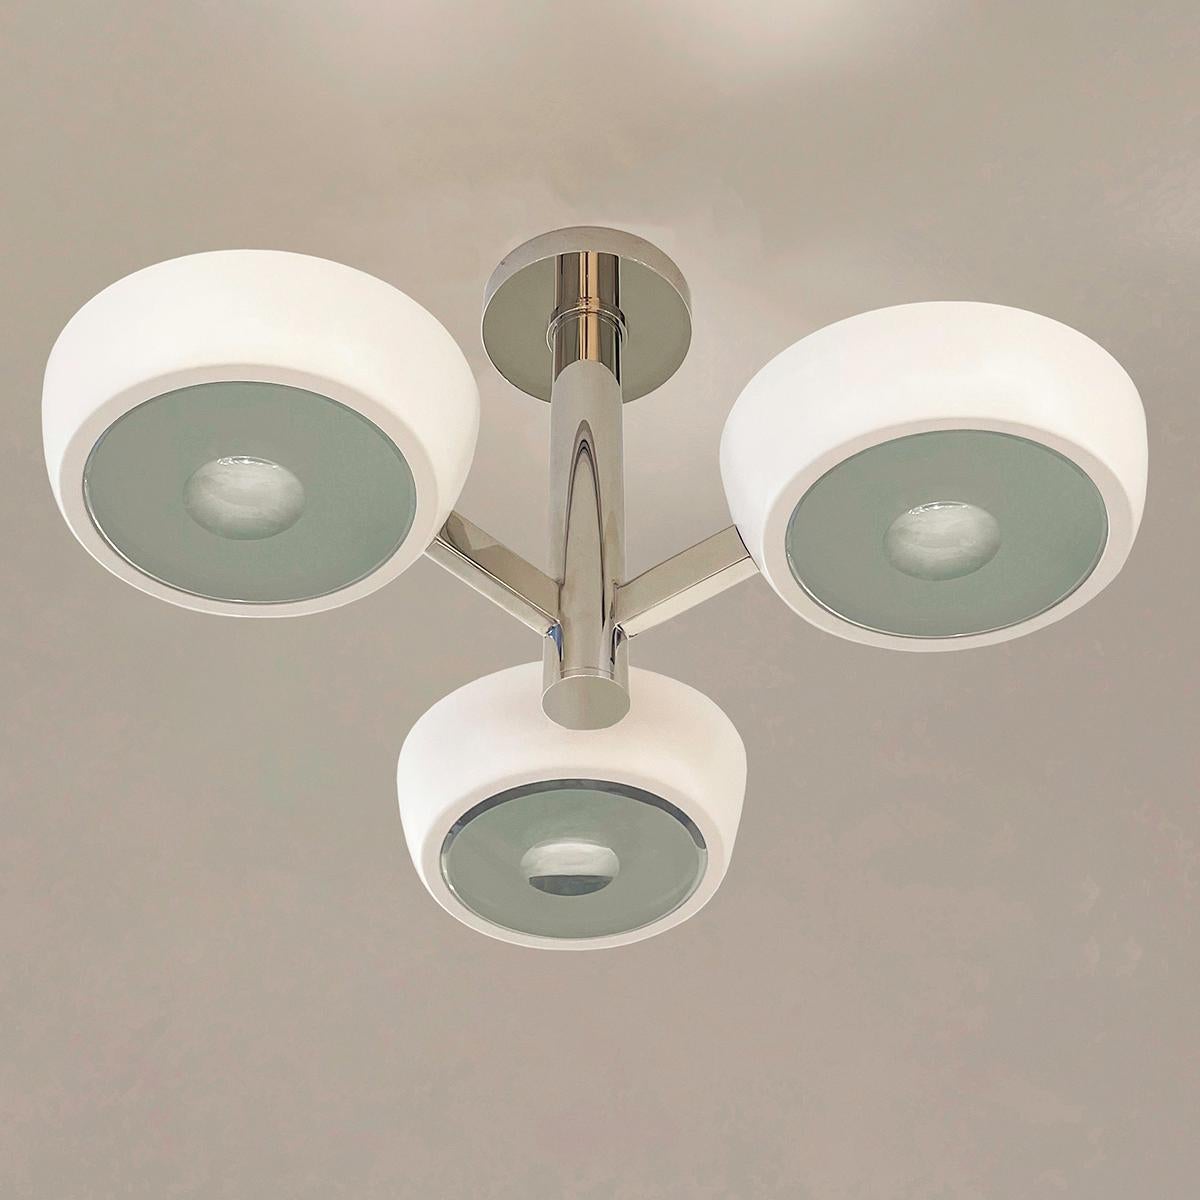 Italian Rose Piccolo Ceiling Light by Form A